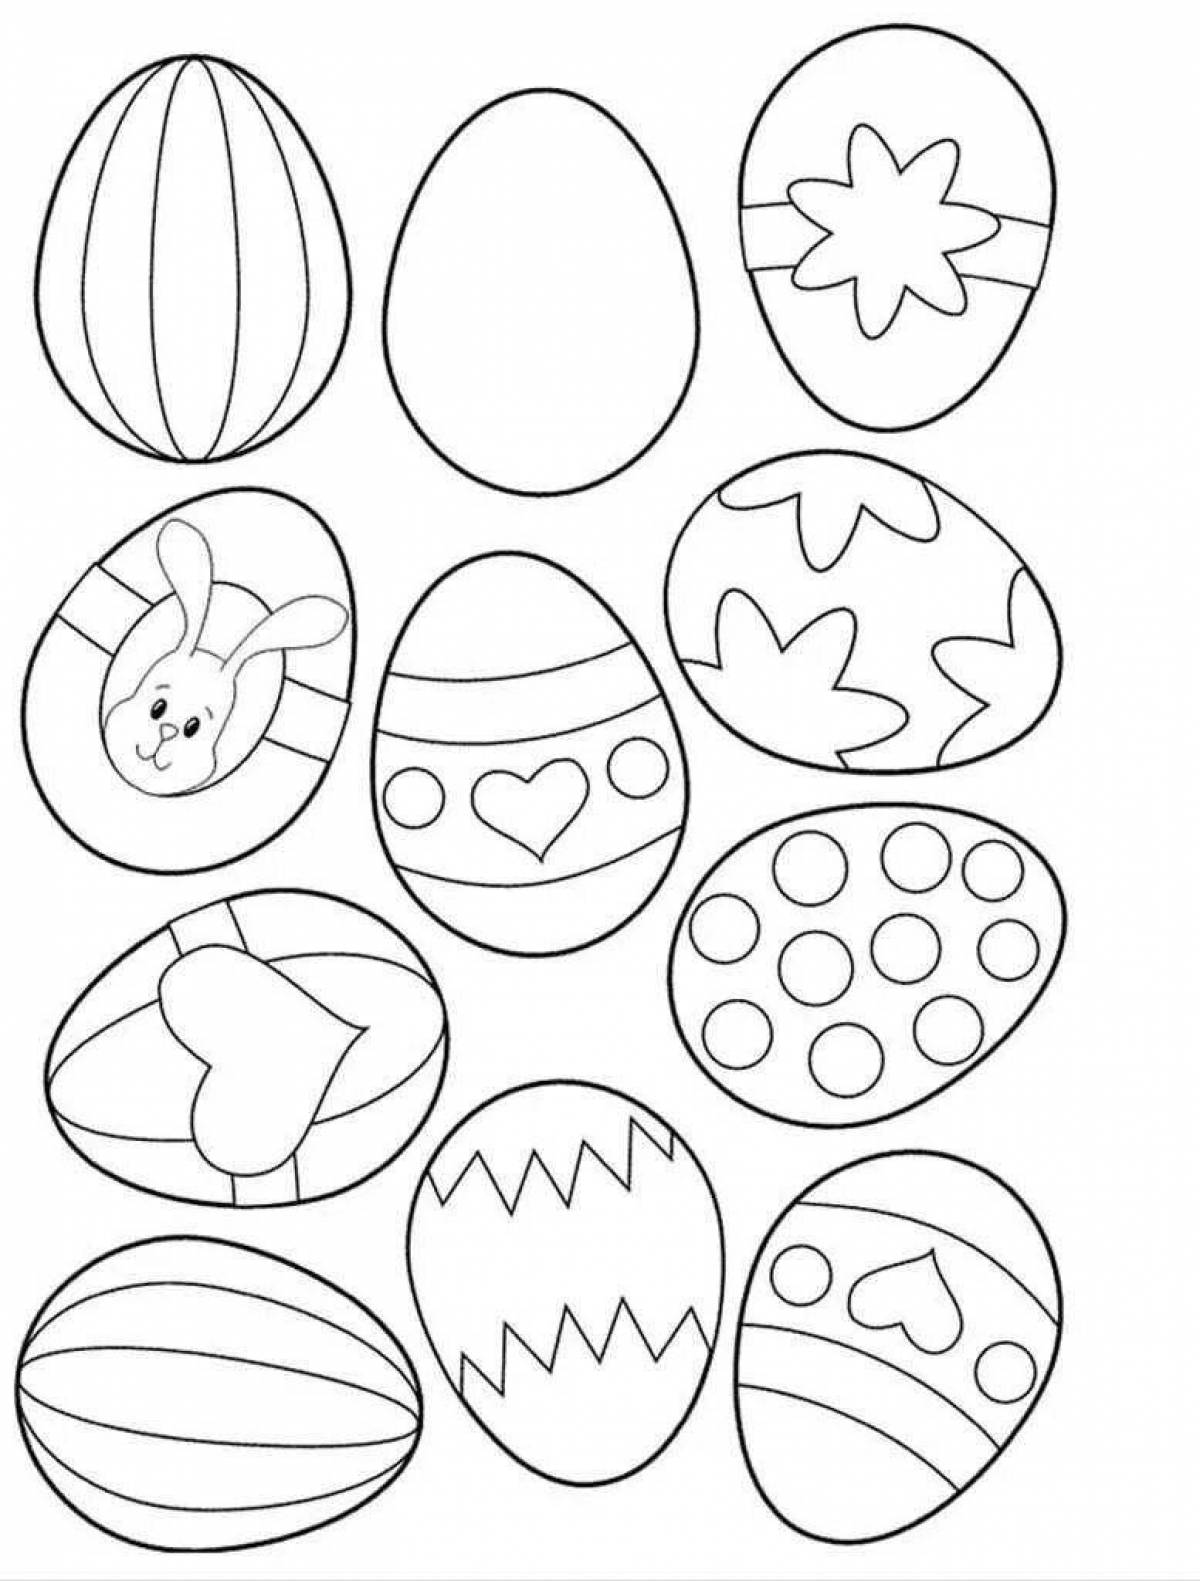 Colorful birthday crafts coloring pages